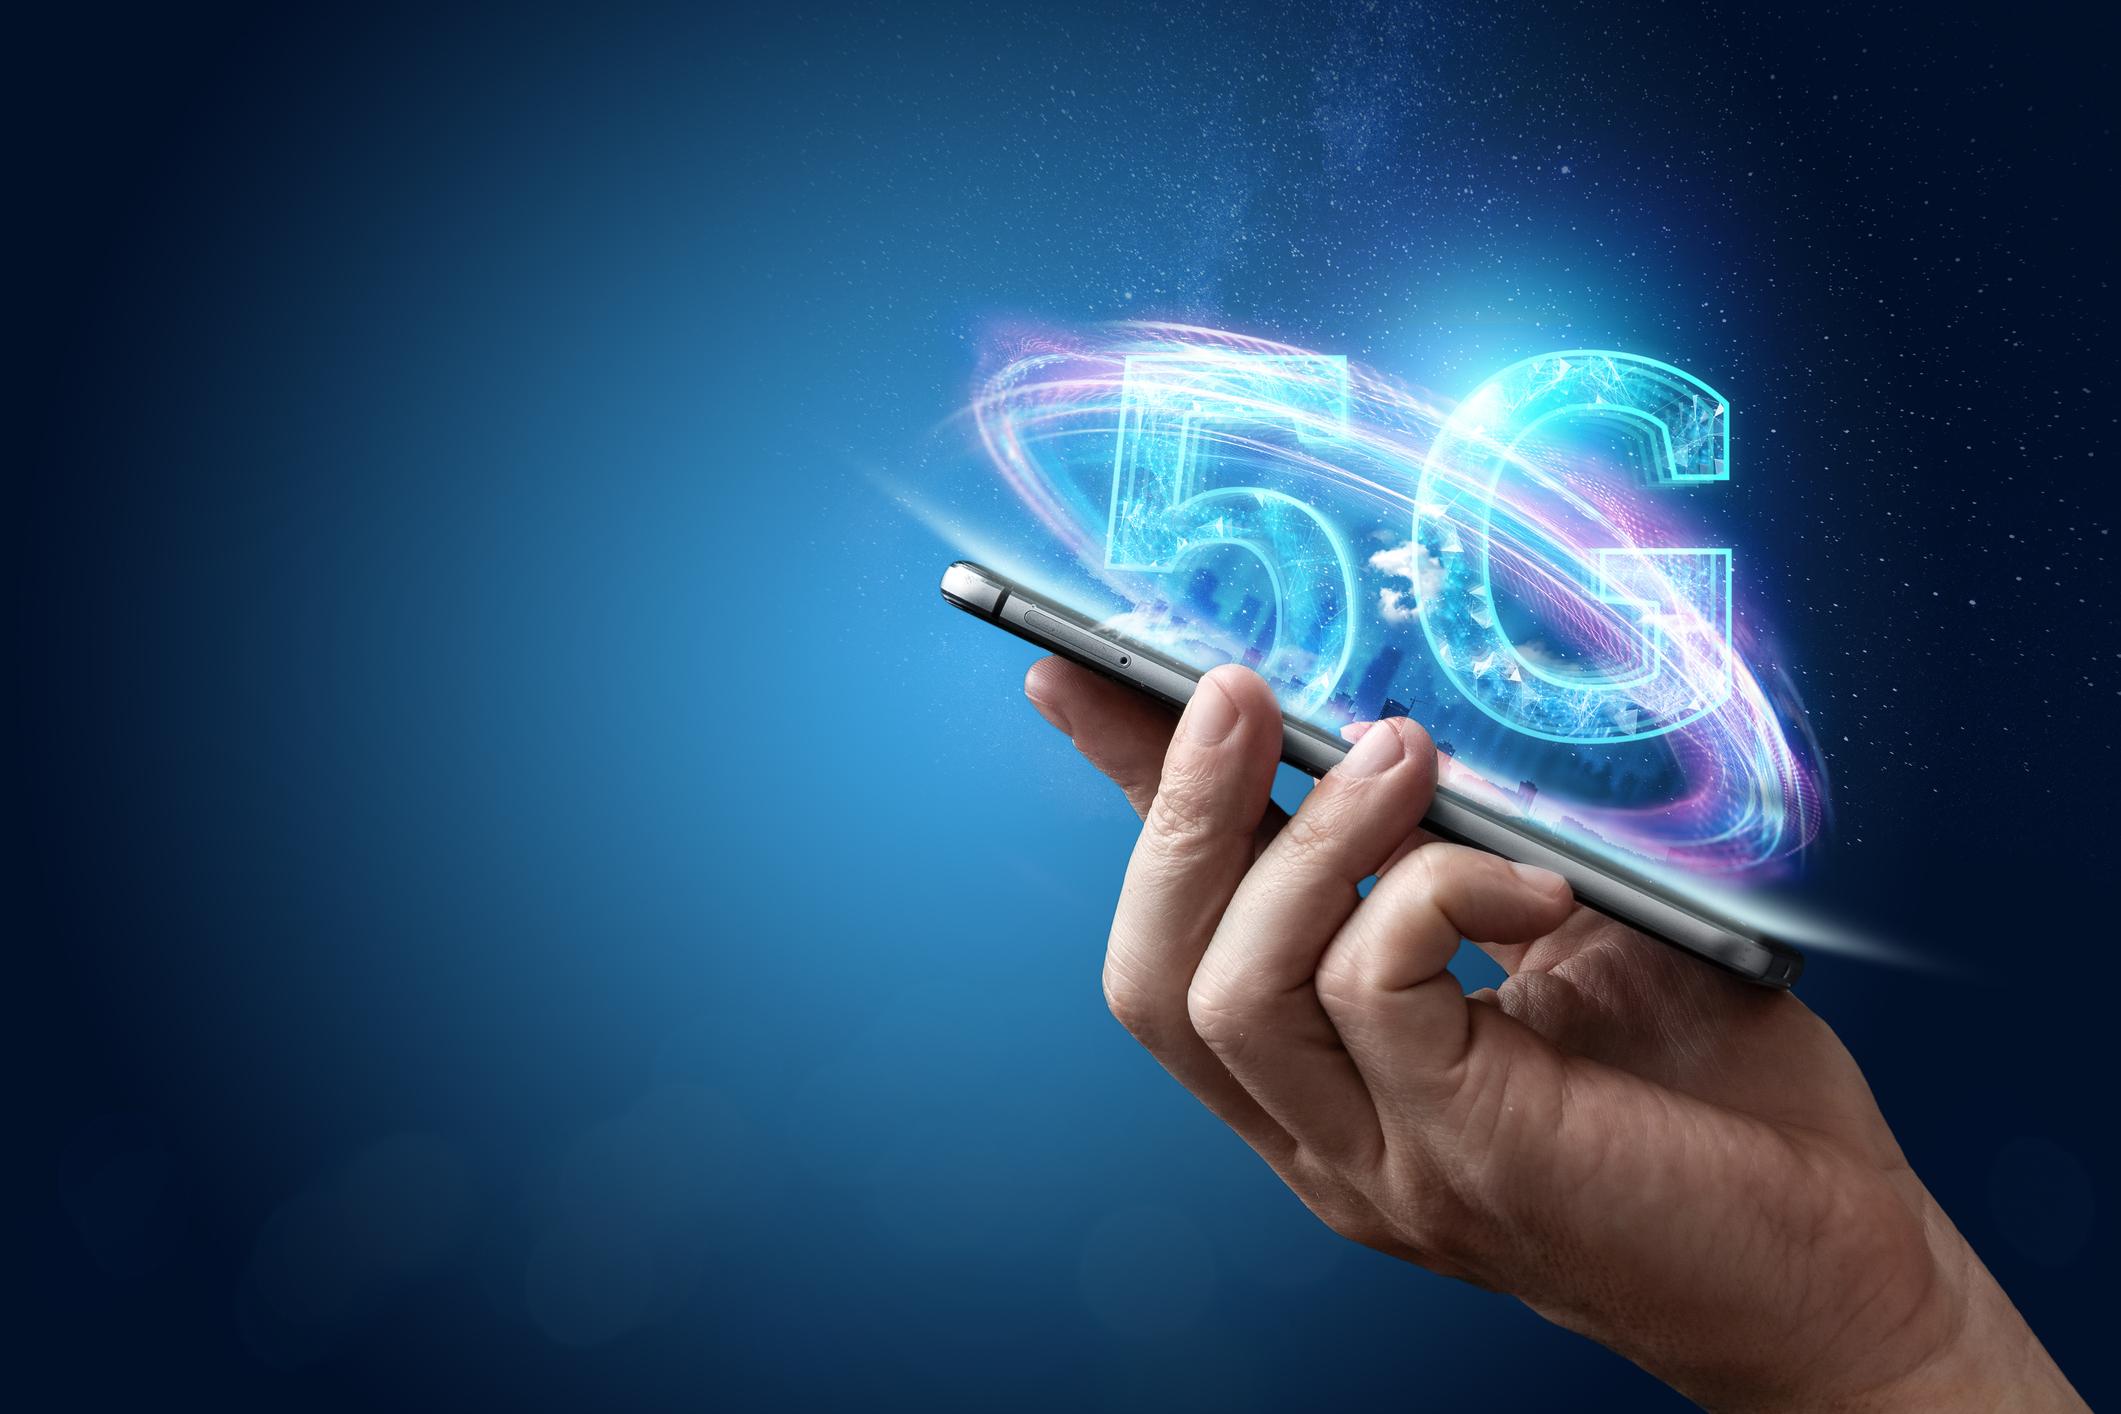 Central Asia Looking to Introduce 5G Technology in Major Cities